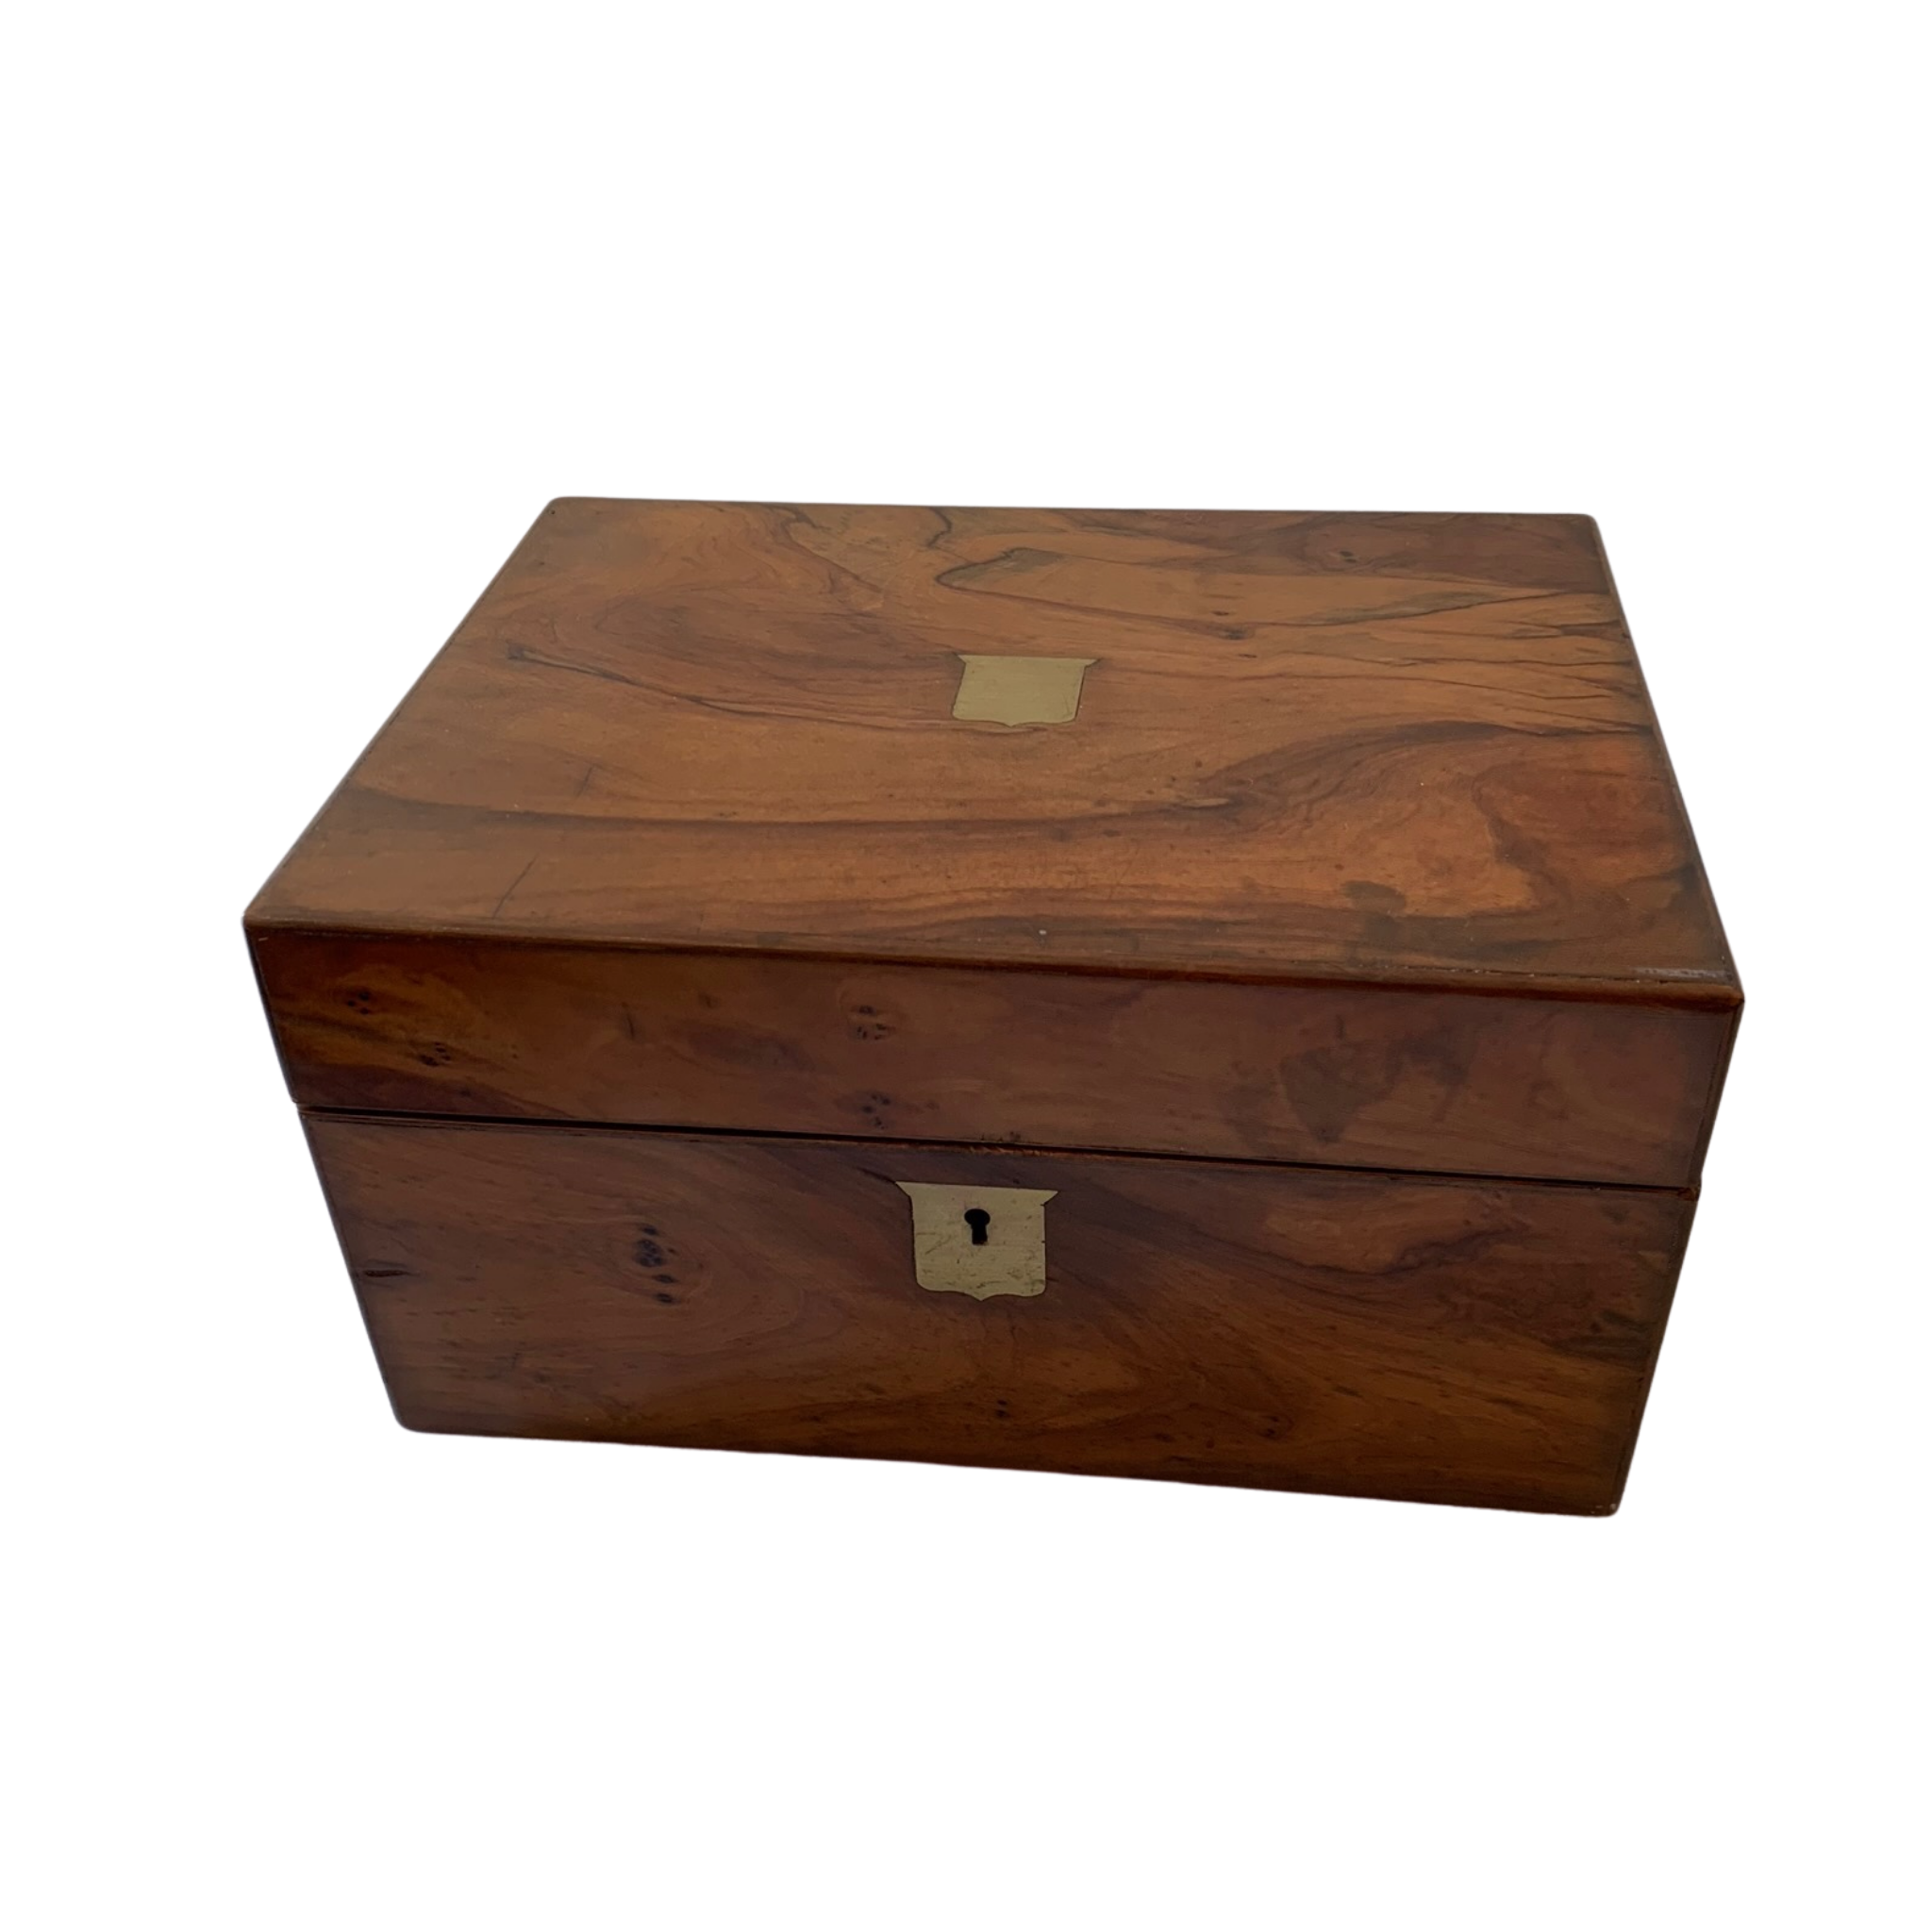 Wooden Sewing Box with Brass Inlaid Escutcheon